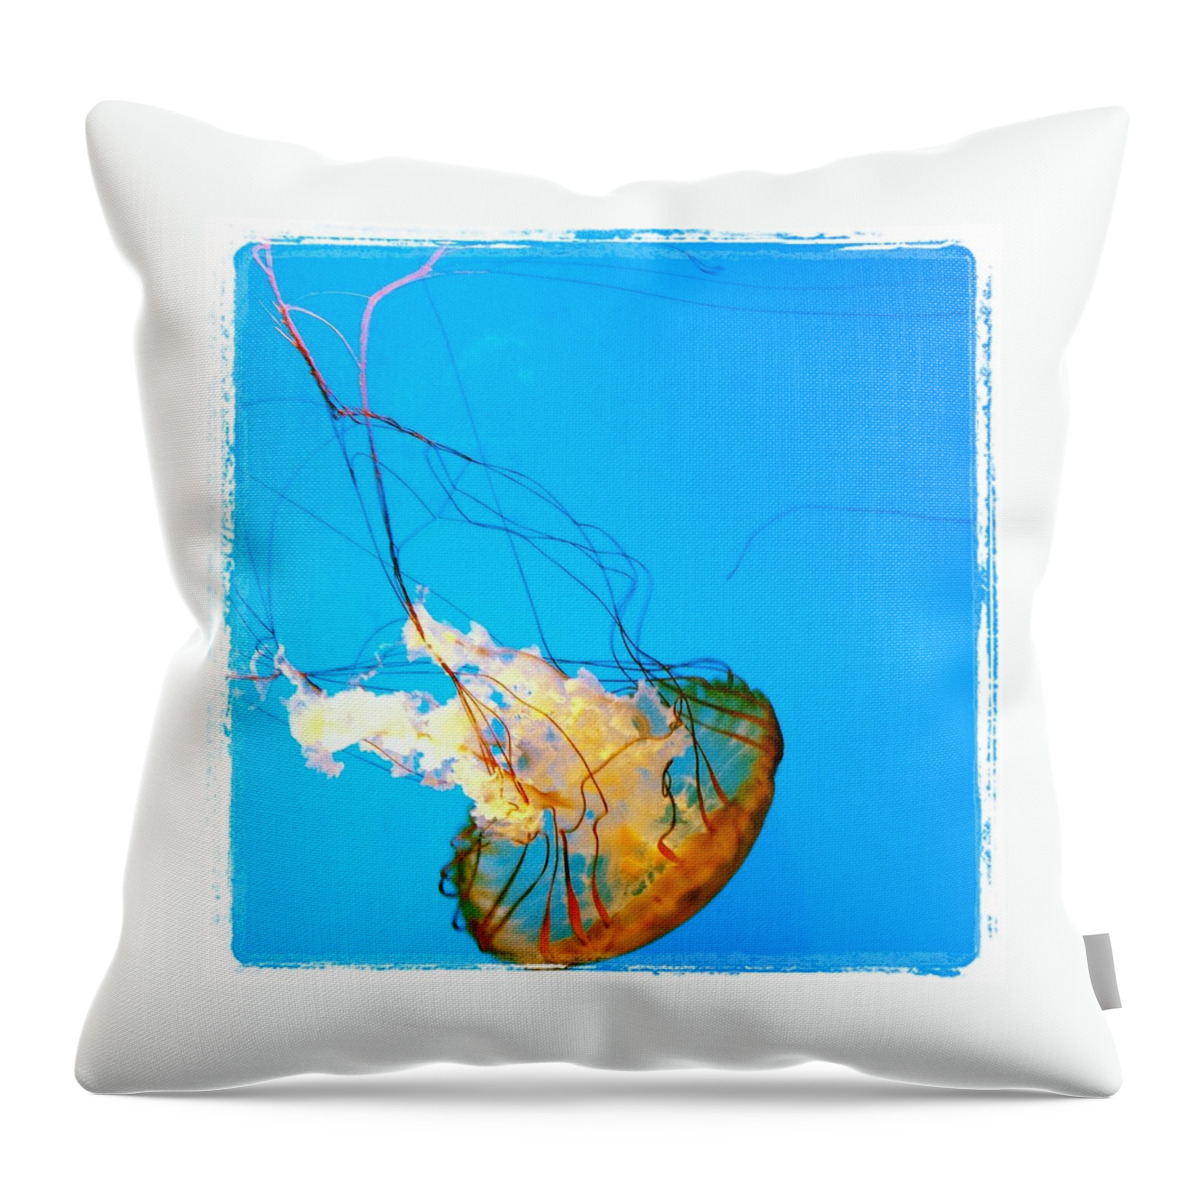 Aquarium Throw Pillow featuring the photograph Baltimore Jellyfish by Will Felix